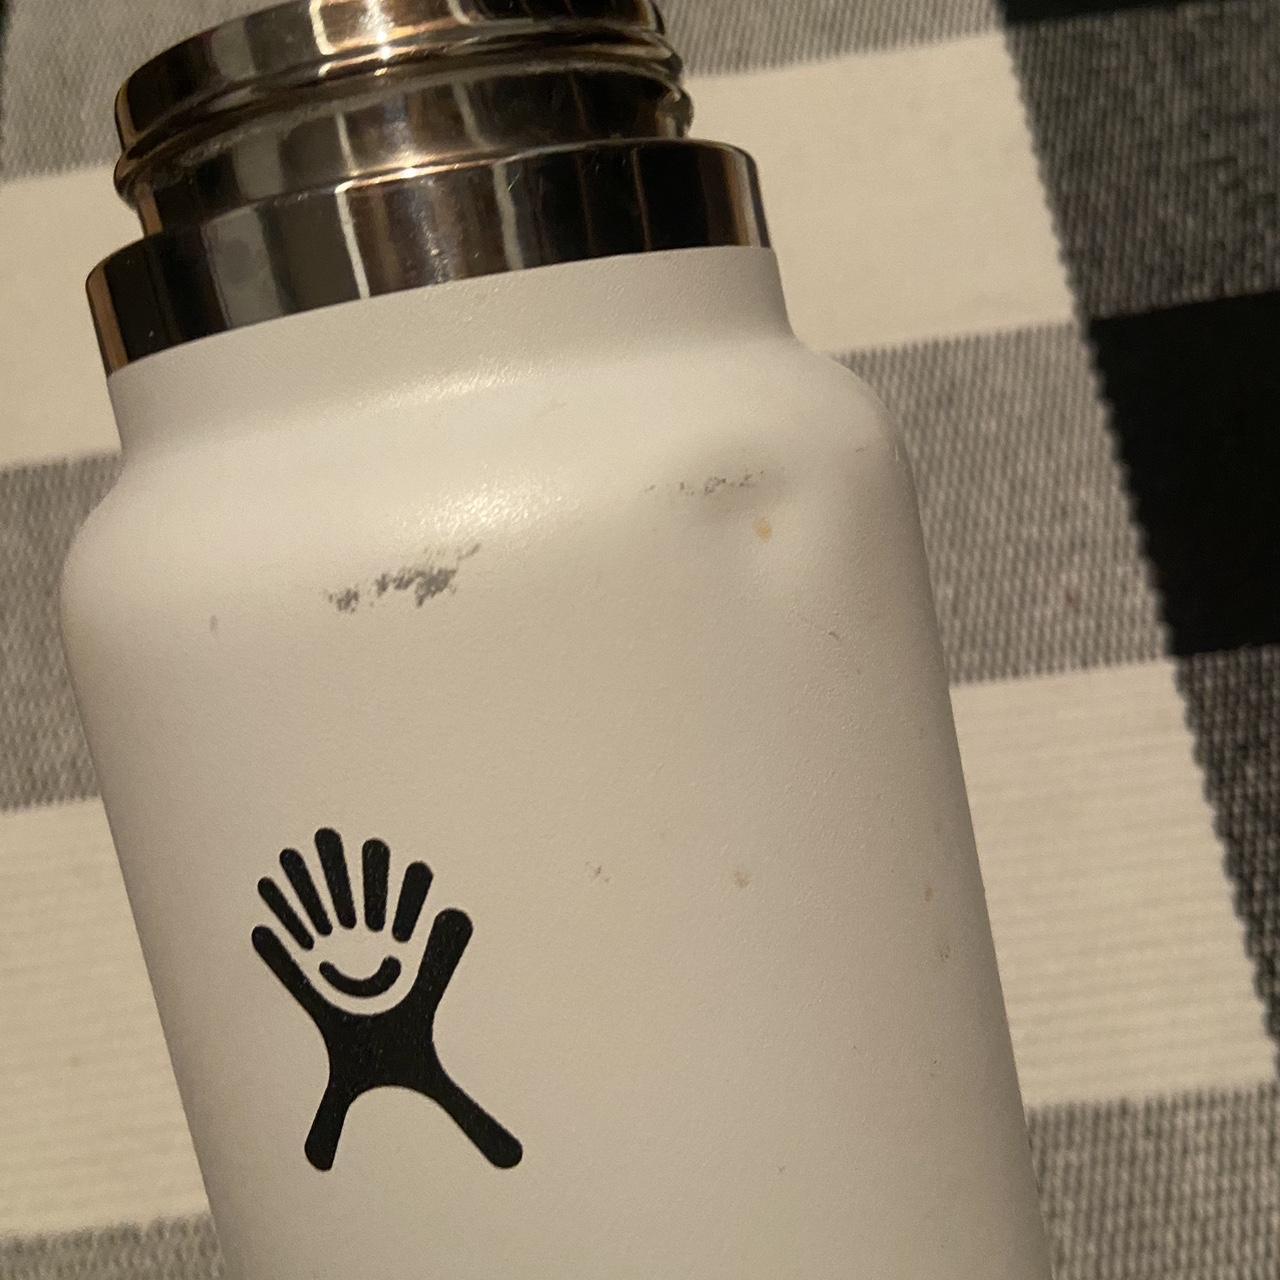 Hydro Flask Beech Whole Foods Exclusive 32oz - Depop